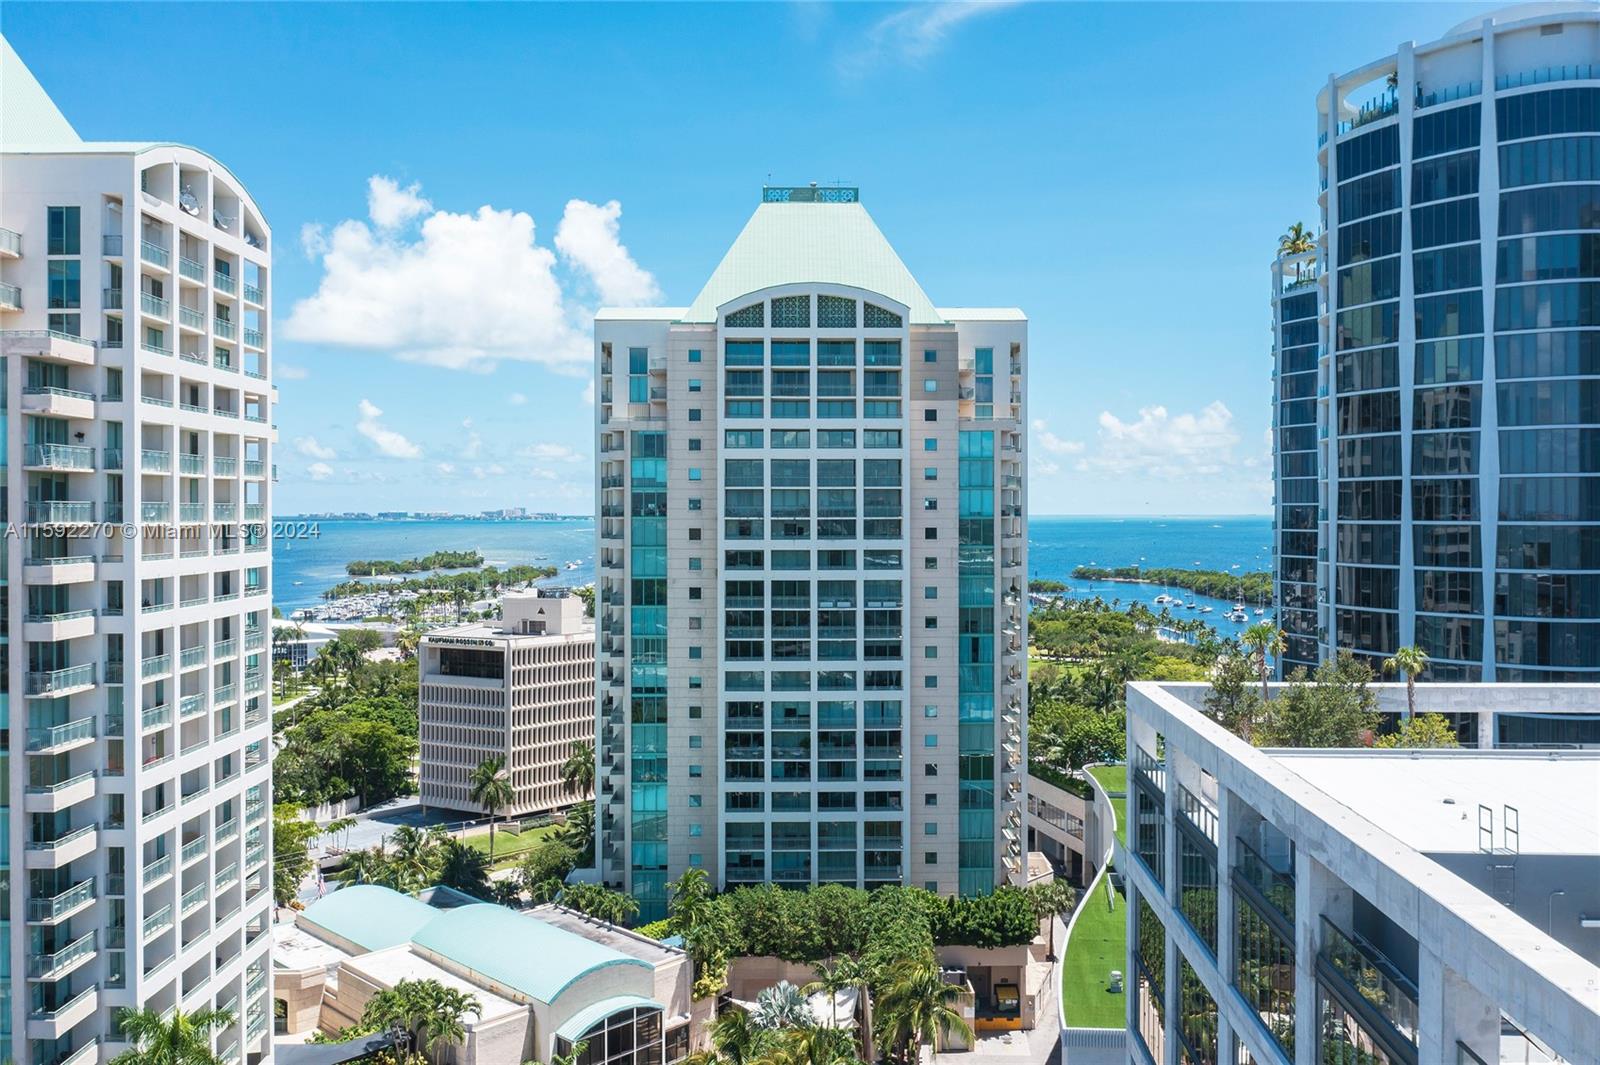 Large corner unit with water and city views at the exclusive Ritz-Carlton Residences in the heart of Coconut Grove across from Biscayne Bay and Regatta Harbour. Access to all 5-star hotel amenities including full-service pool, spa, fitness center, restaurants & bars, concierge, and valet parking plus residents-only amenities. Walking distance to waterfront parks, restaurants, shops, entertainment, and top schools. Easy drive to Downtown Miami, Miami Beach, Coral Gables, and the Miami International Airport. Great income potential with flexible rental terms for investors and second home buyers. Currently rented through April 15, 2025.